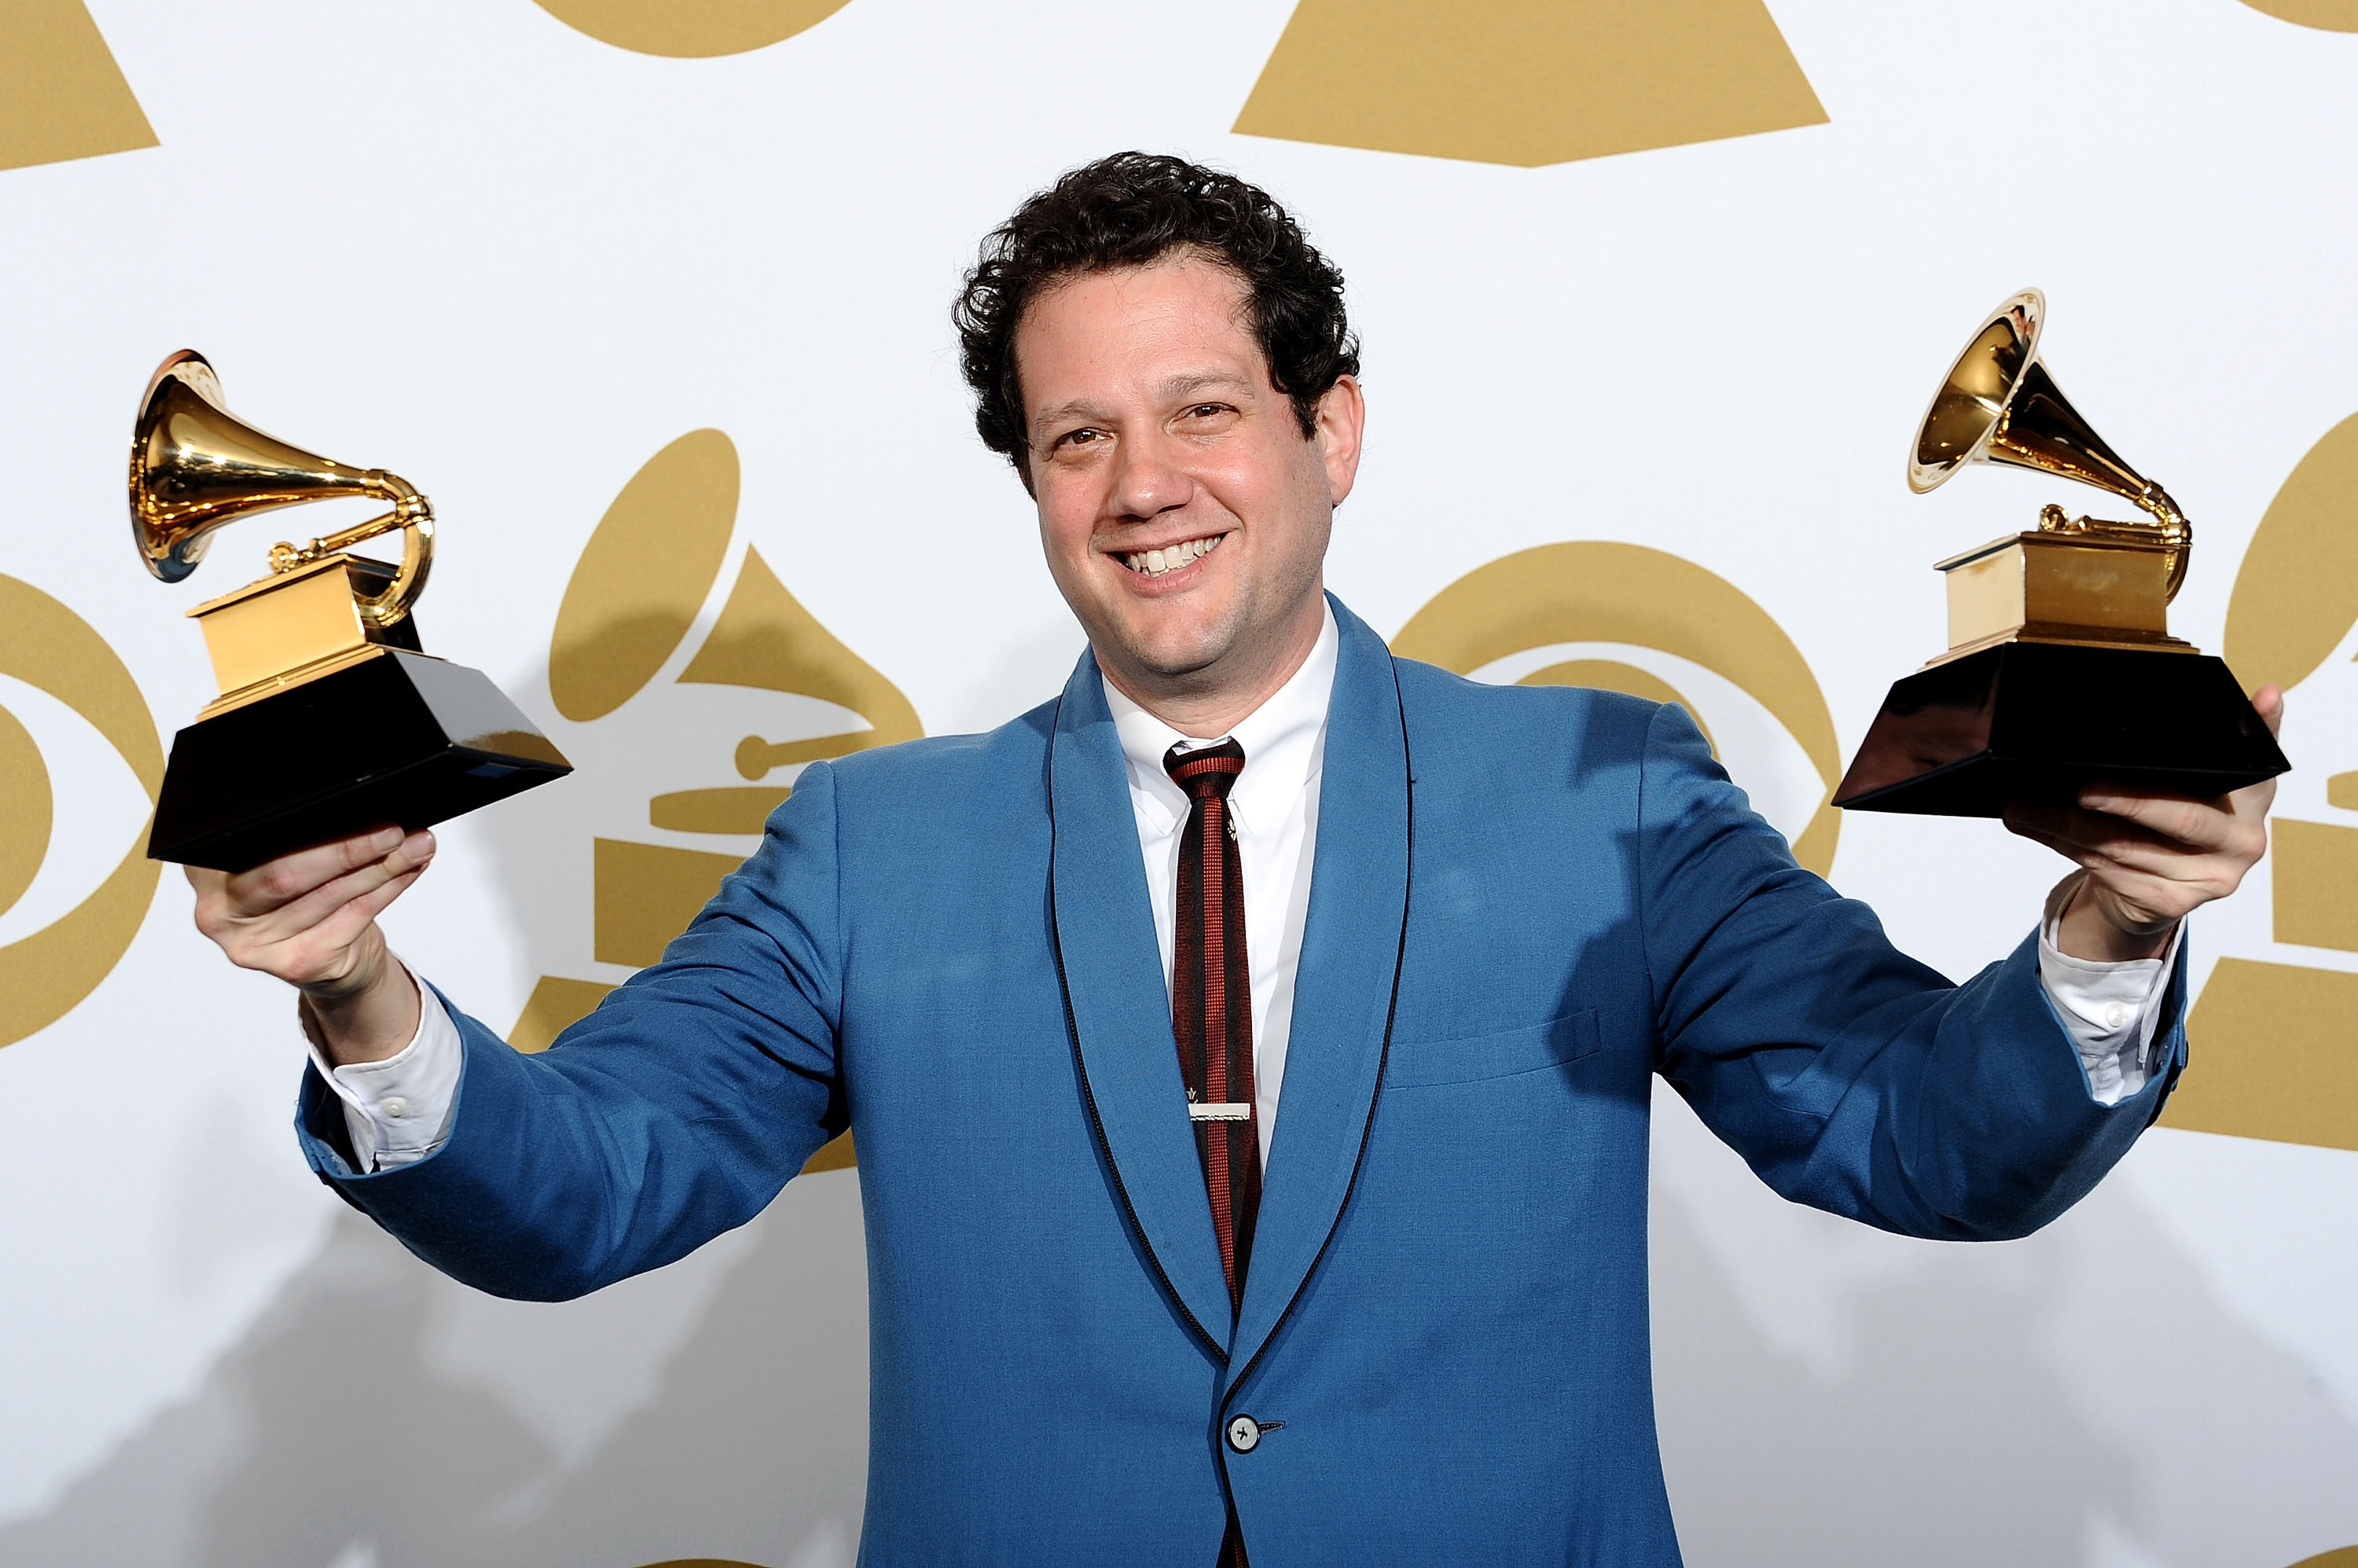 Michael Giacchino poses in the press room at the 52nd Annual GRAMMY Awards held at Staples Center on January 31, 2010 in Los Angeles, California. The 52nd Annual GRAMMY Awards - Press Room Staples Center Los Angeles, CA United States January 31, 2010 Photo by Michael Buckner/WireImage.com To license this image (59464324), contact WireImage.com